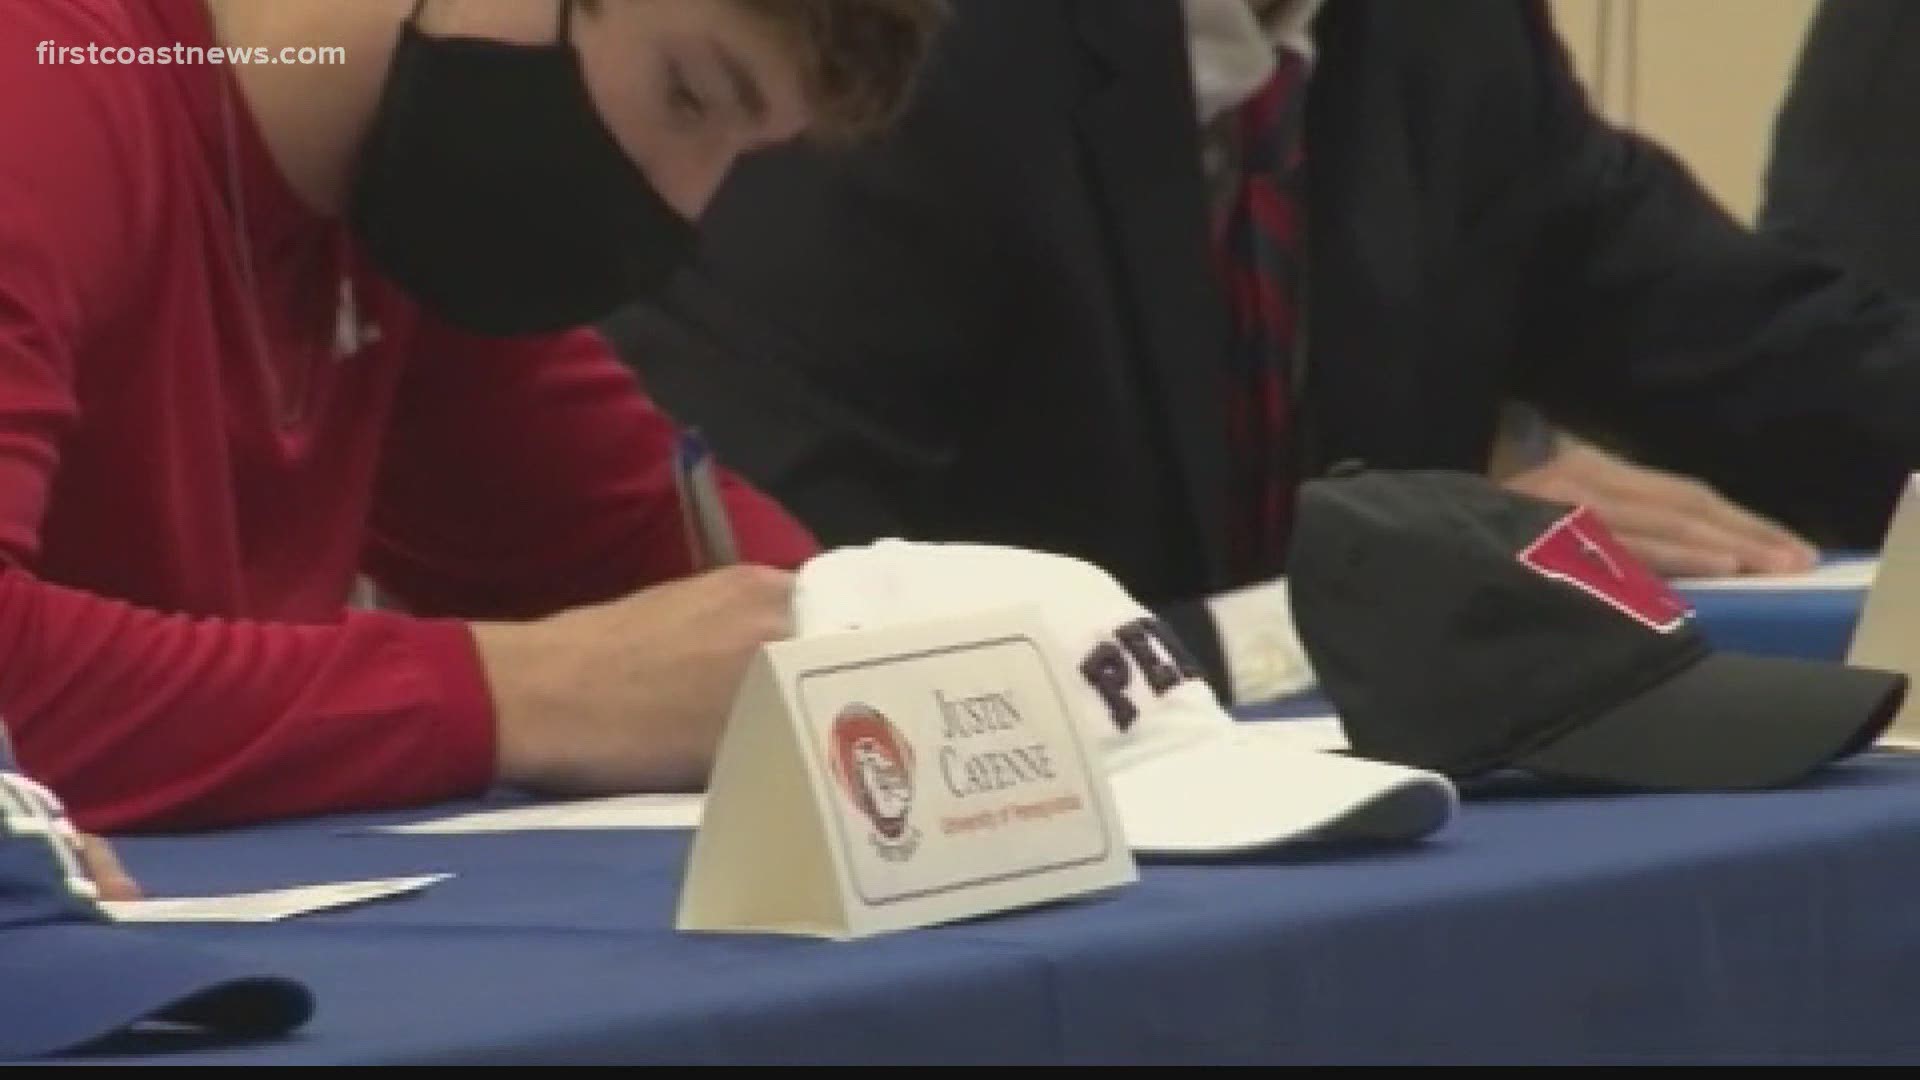 Notably, Justin Cayenne and Davis Ellis are both headed to the Ivy League to play for the University of Pennsylvania.